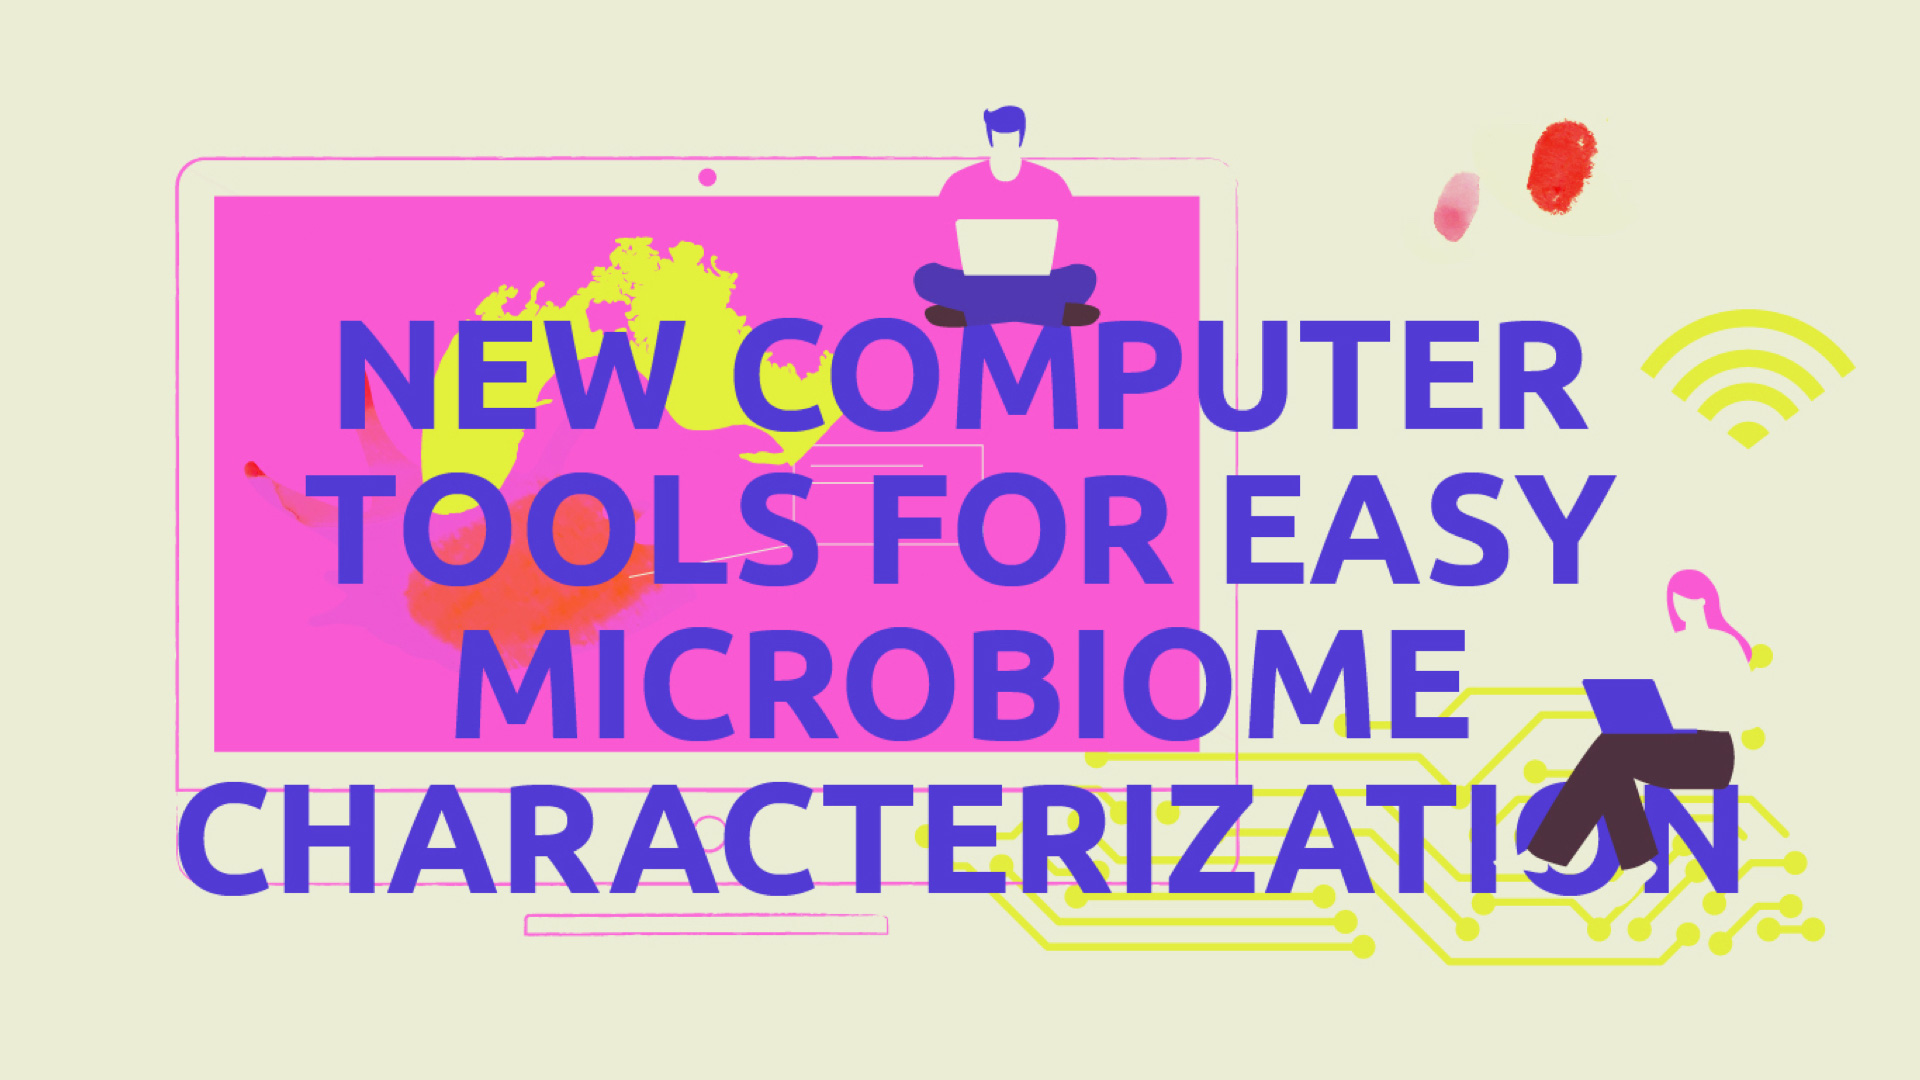 New computer tools for easy microbiome characterization